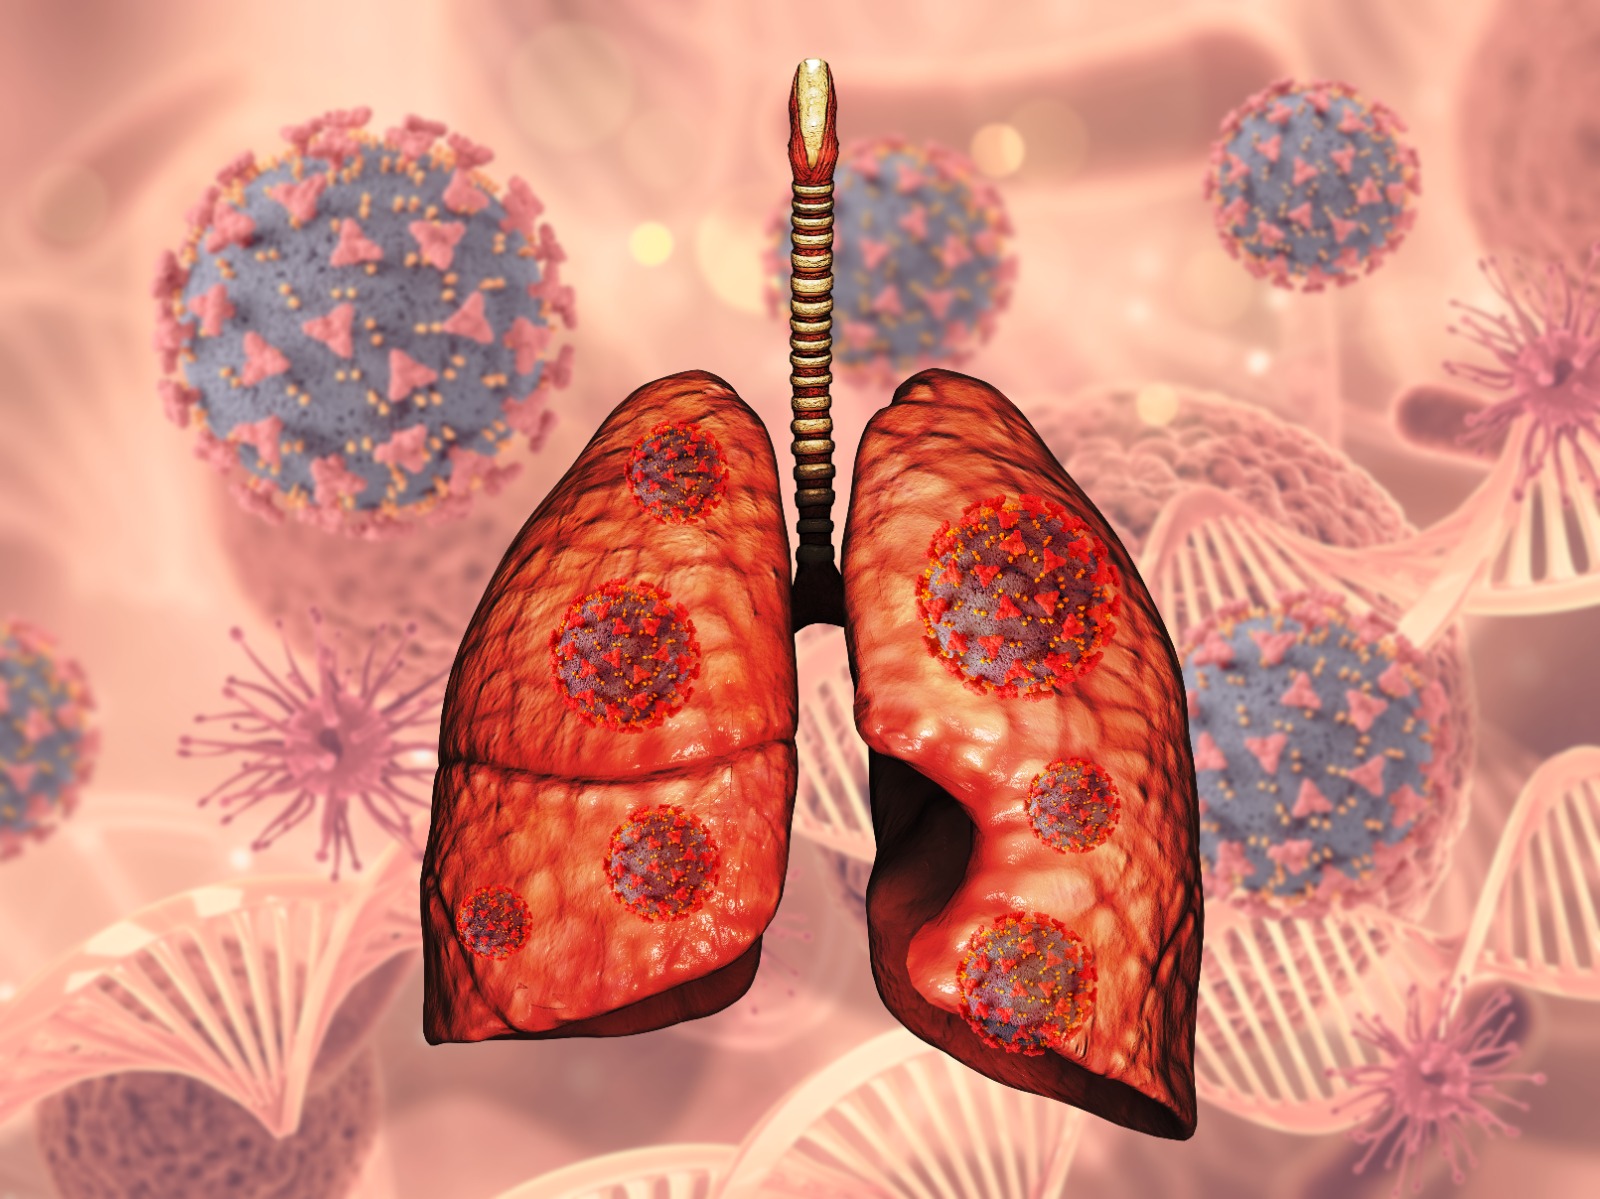 What is Lung Cancer? What are the symptoms and treatment option available – Dr Vinayak Mangal